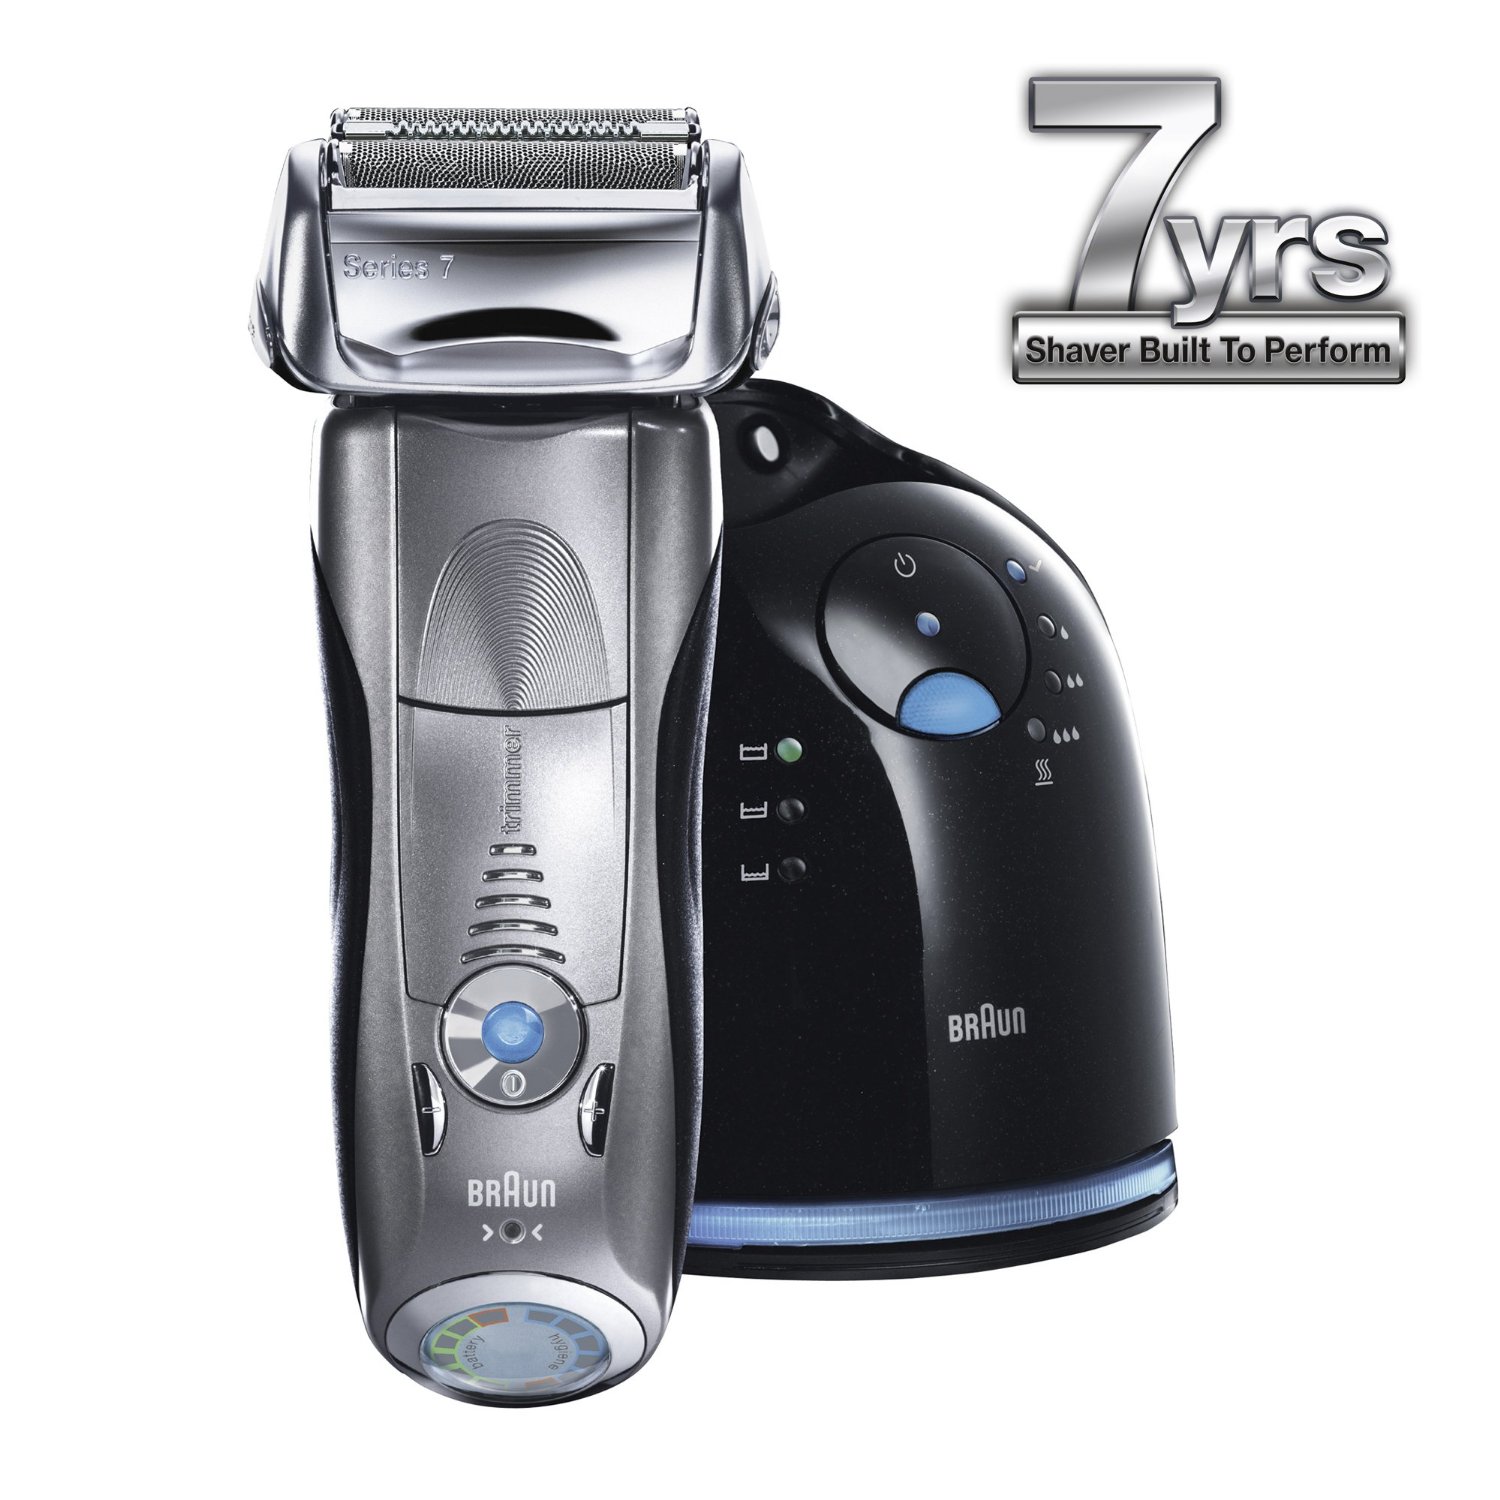 Braun 790cc Electric Razor Review [After Acute Use]